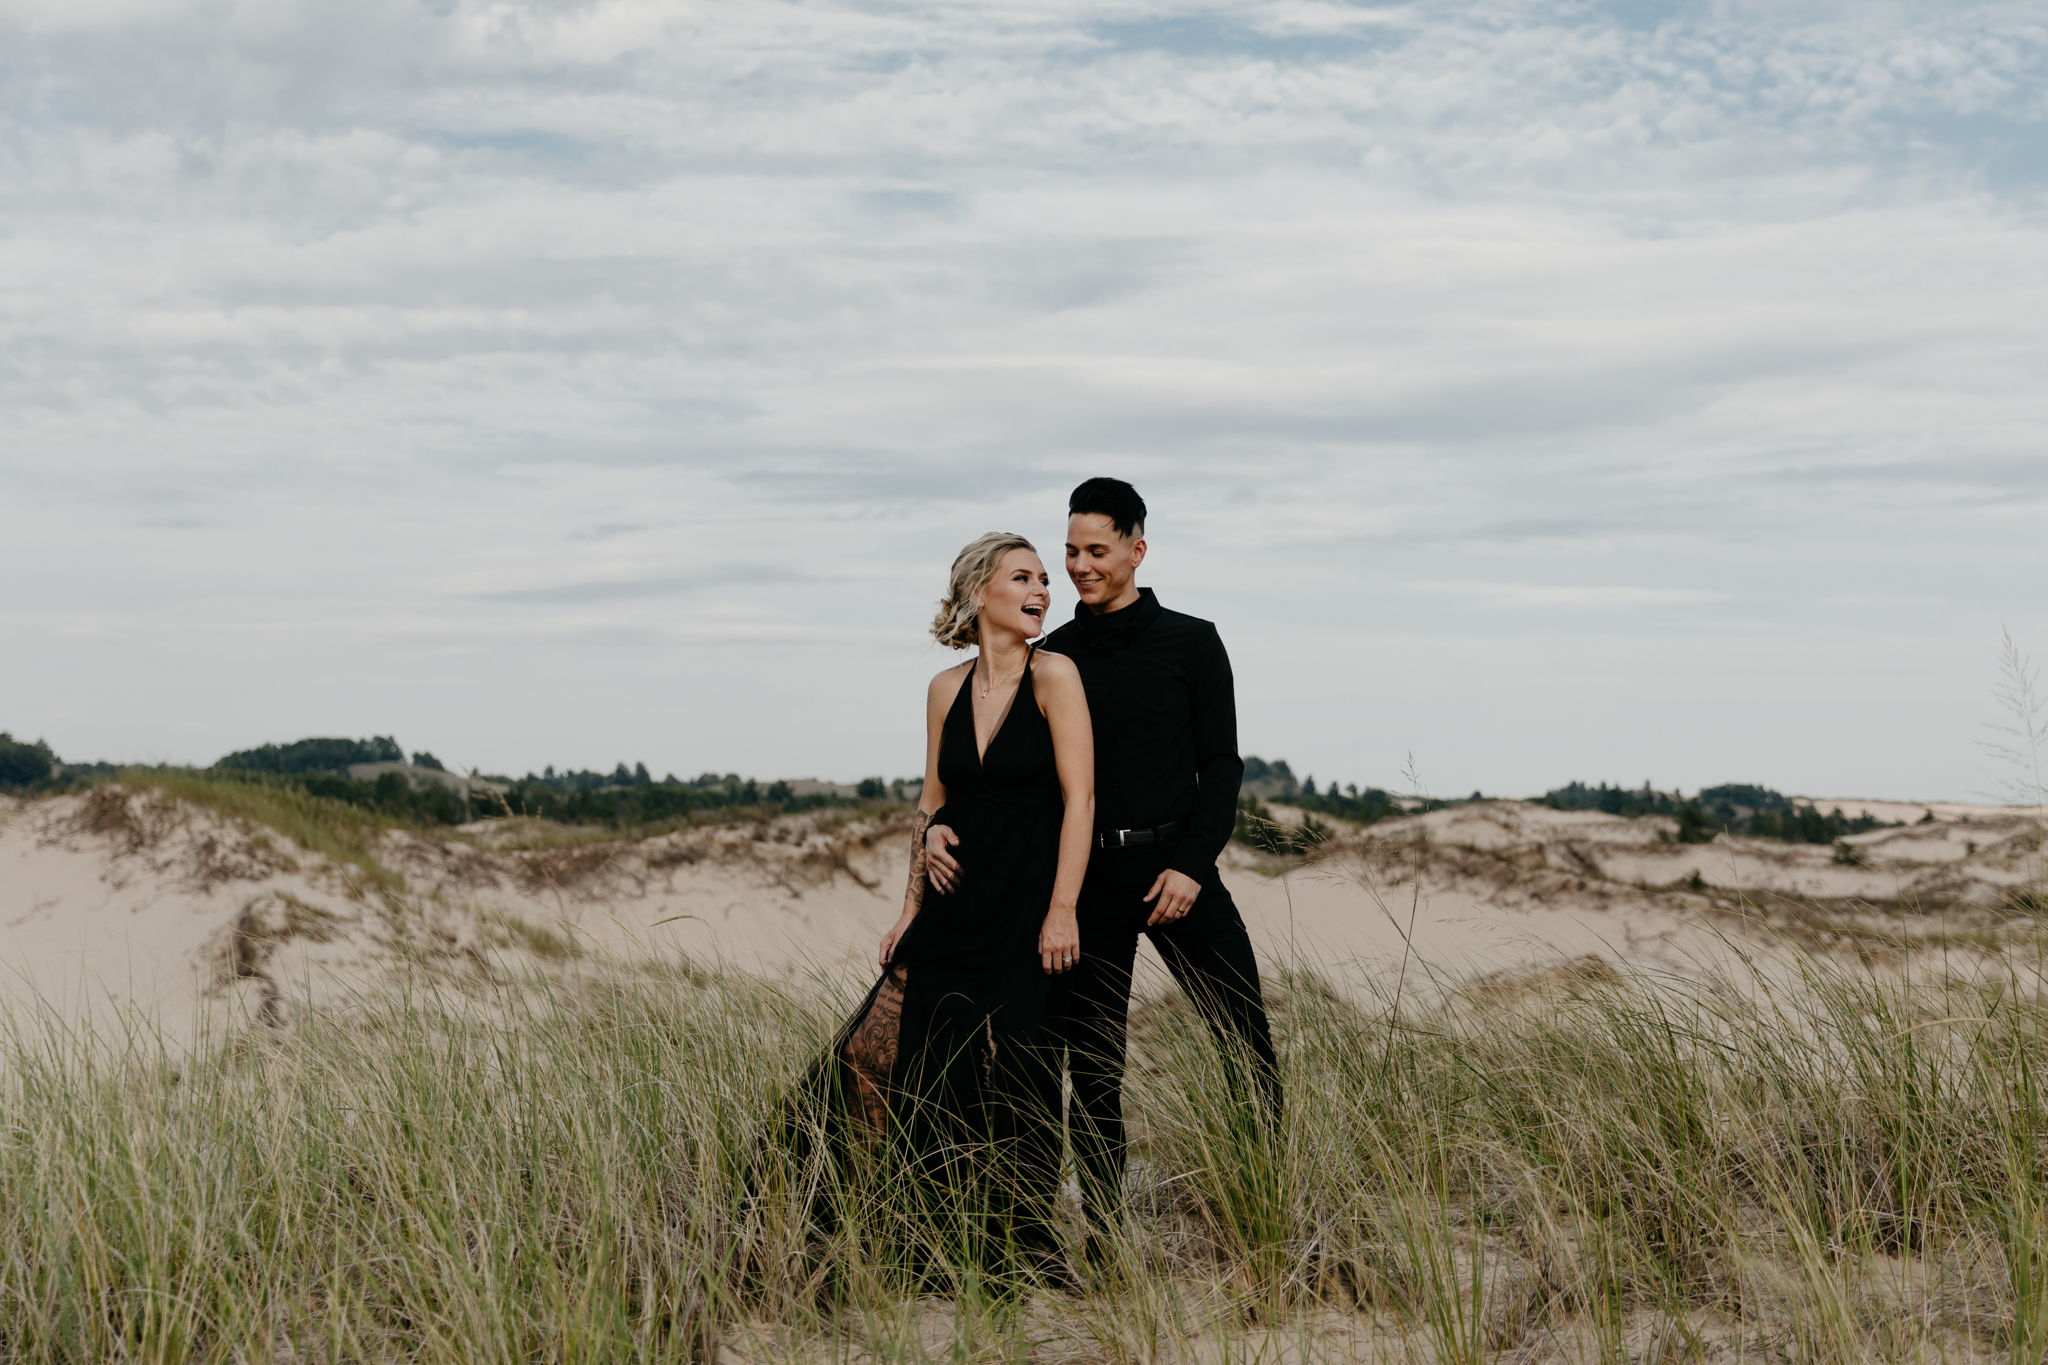 This LGBTQ Michigan Elopement has all the vibes complete with a black wedding dress